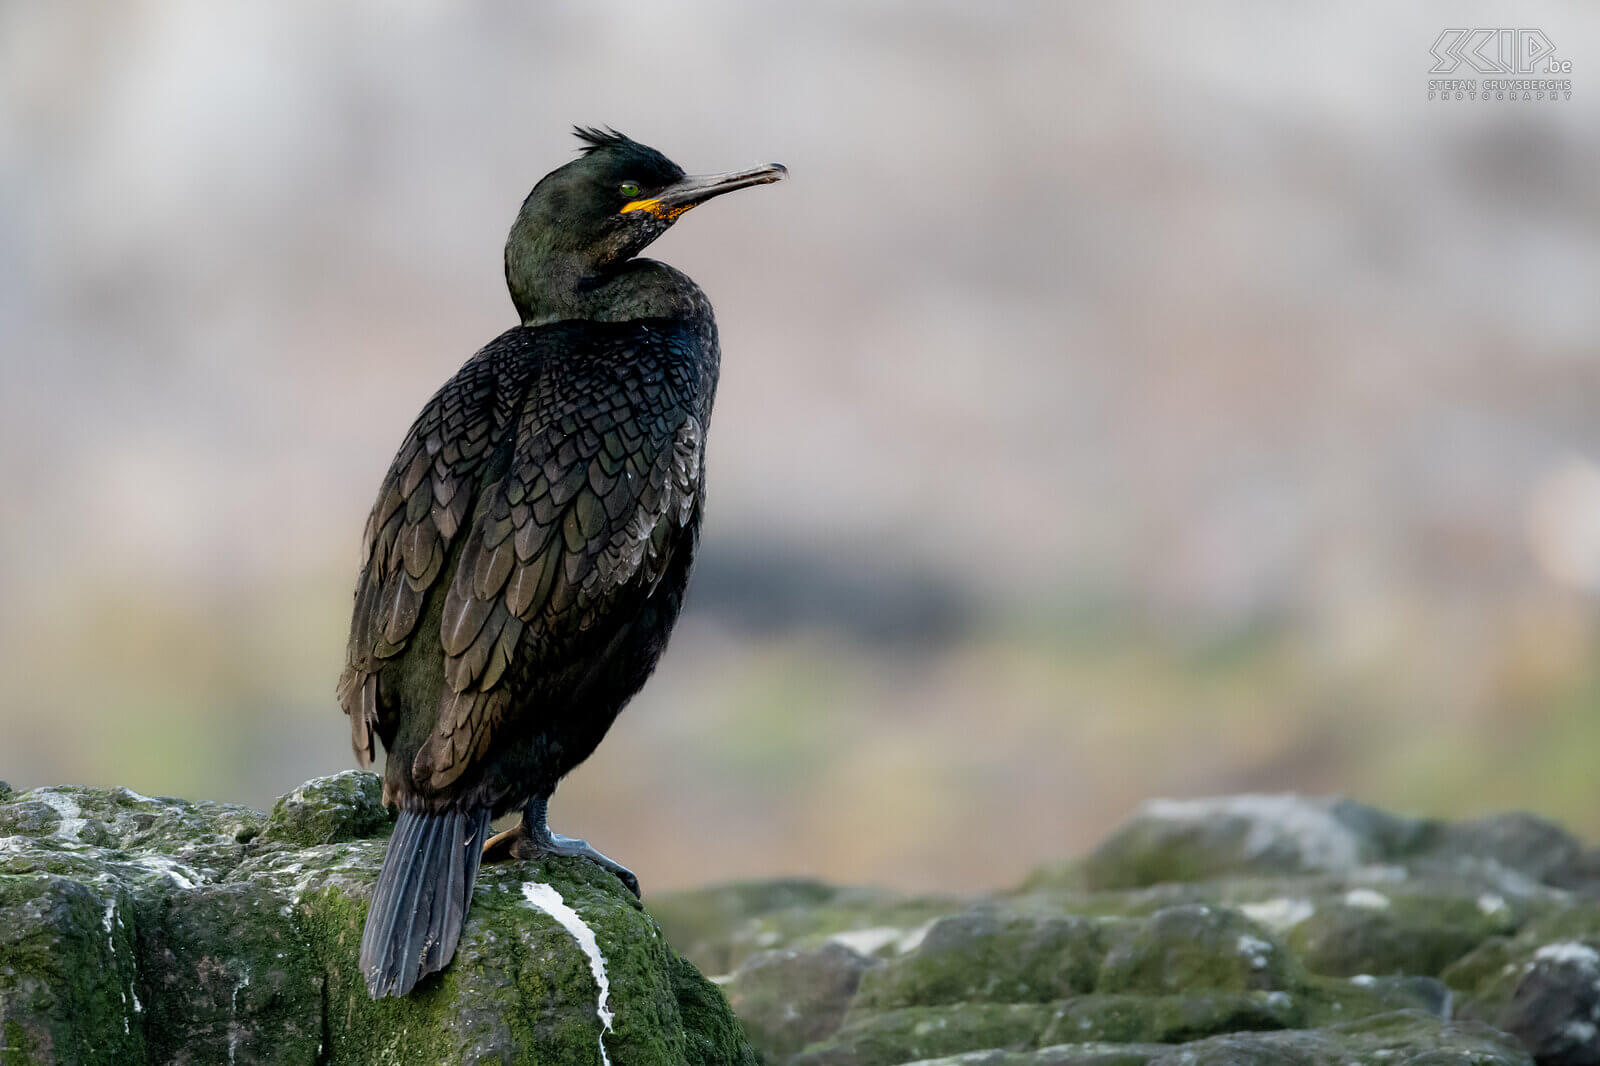 Farne Islands - Shag Two species of cormorants also live on the Scottish and English coasts; the common cormorant and the shag. Shags are smaller with a more slender body. Their plumage is black with a green gloss and in the breeding season their peaked forehead sports a tufted crest. Stefan Cruysberghs